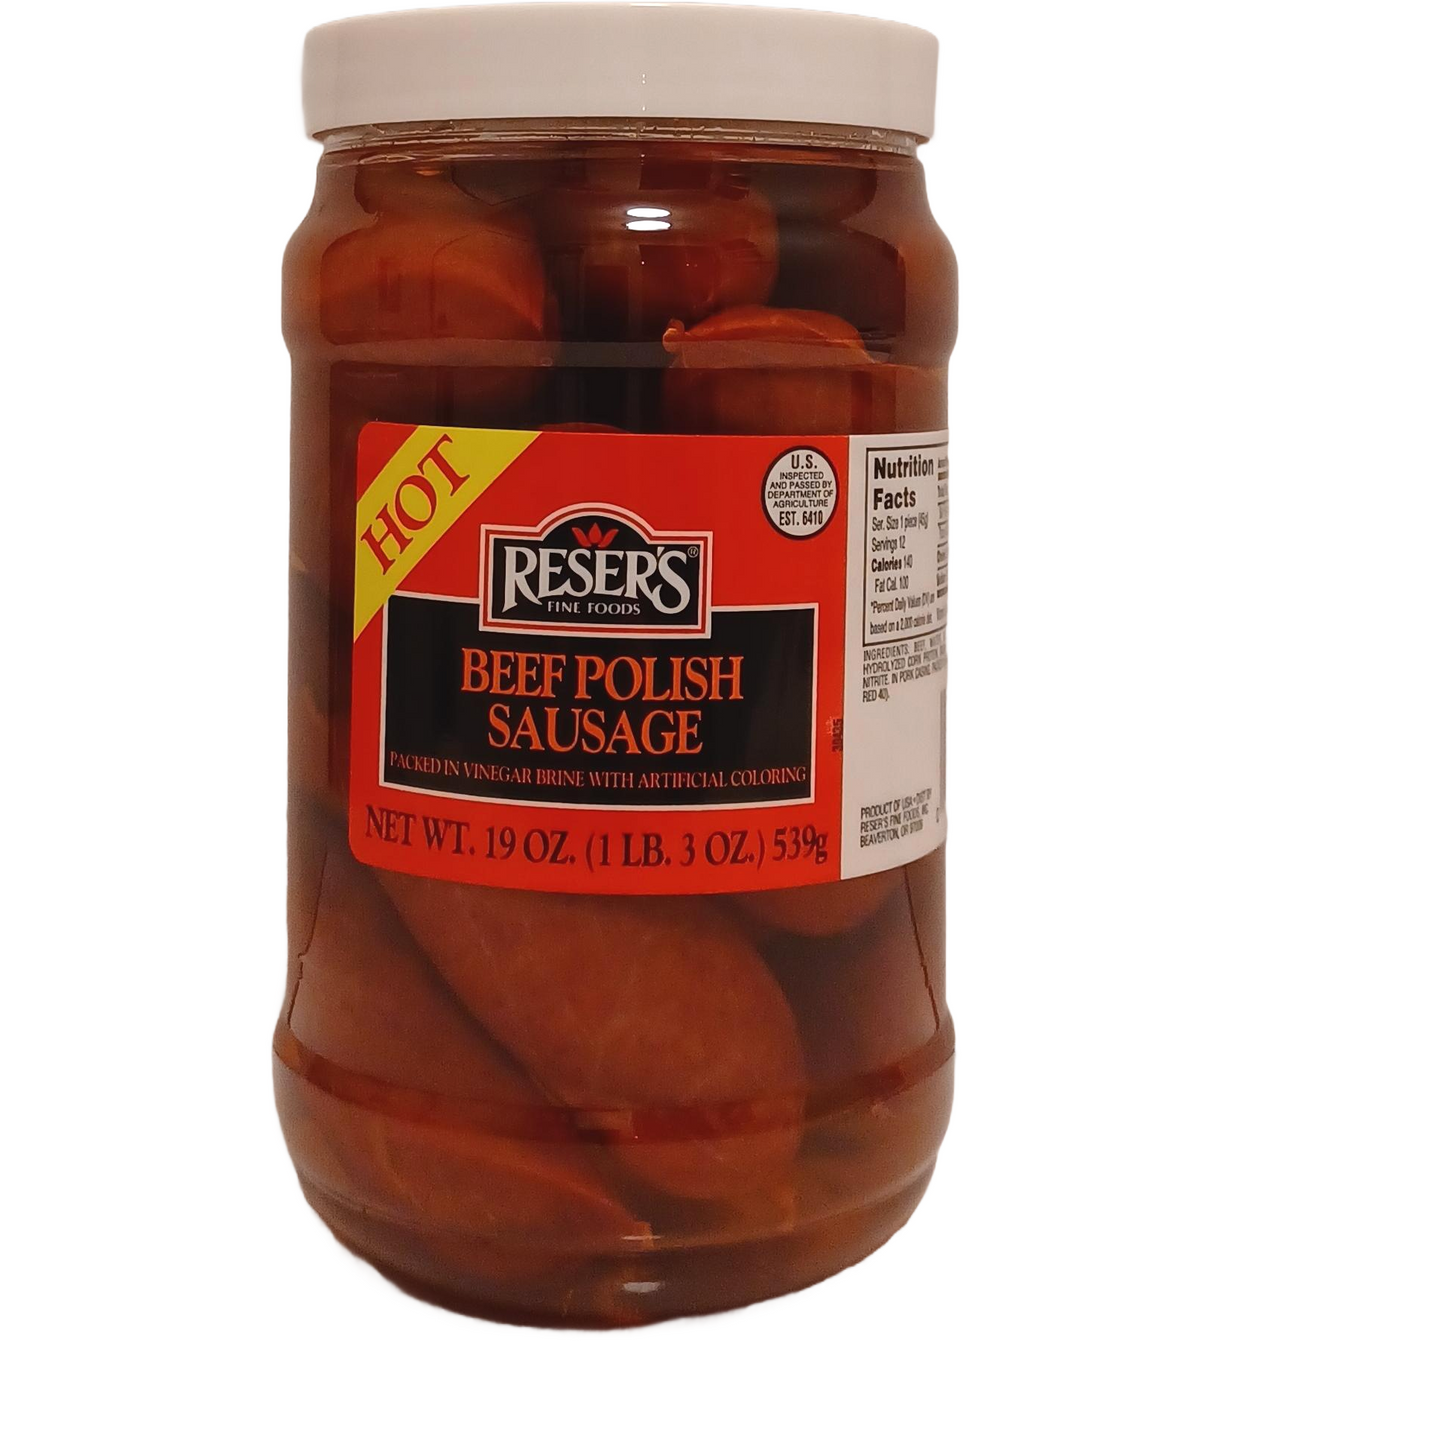 Beef Hot Pickled Polish Sausage by Reser's 2 Pack of 1 Quart Jars